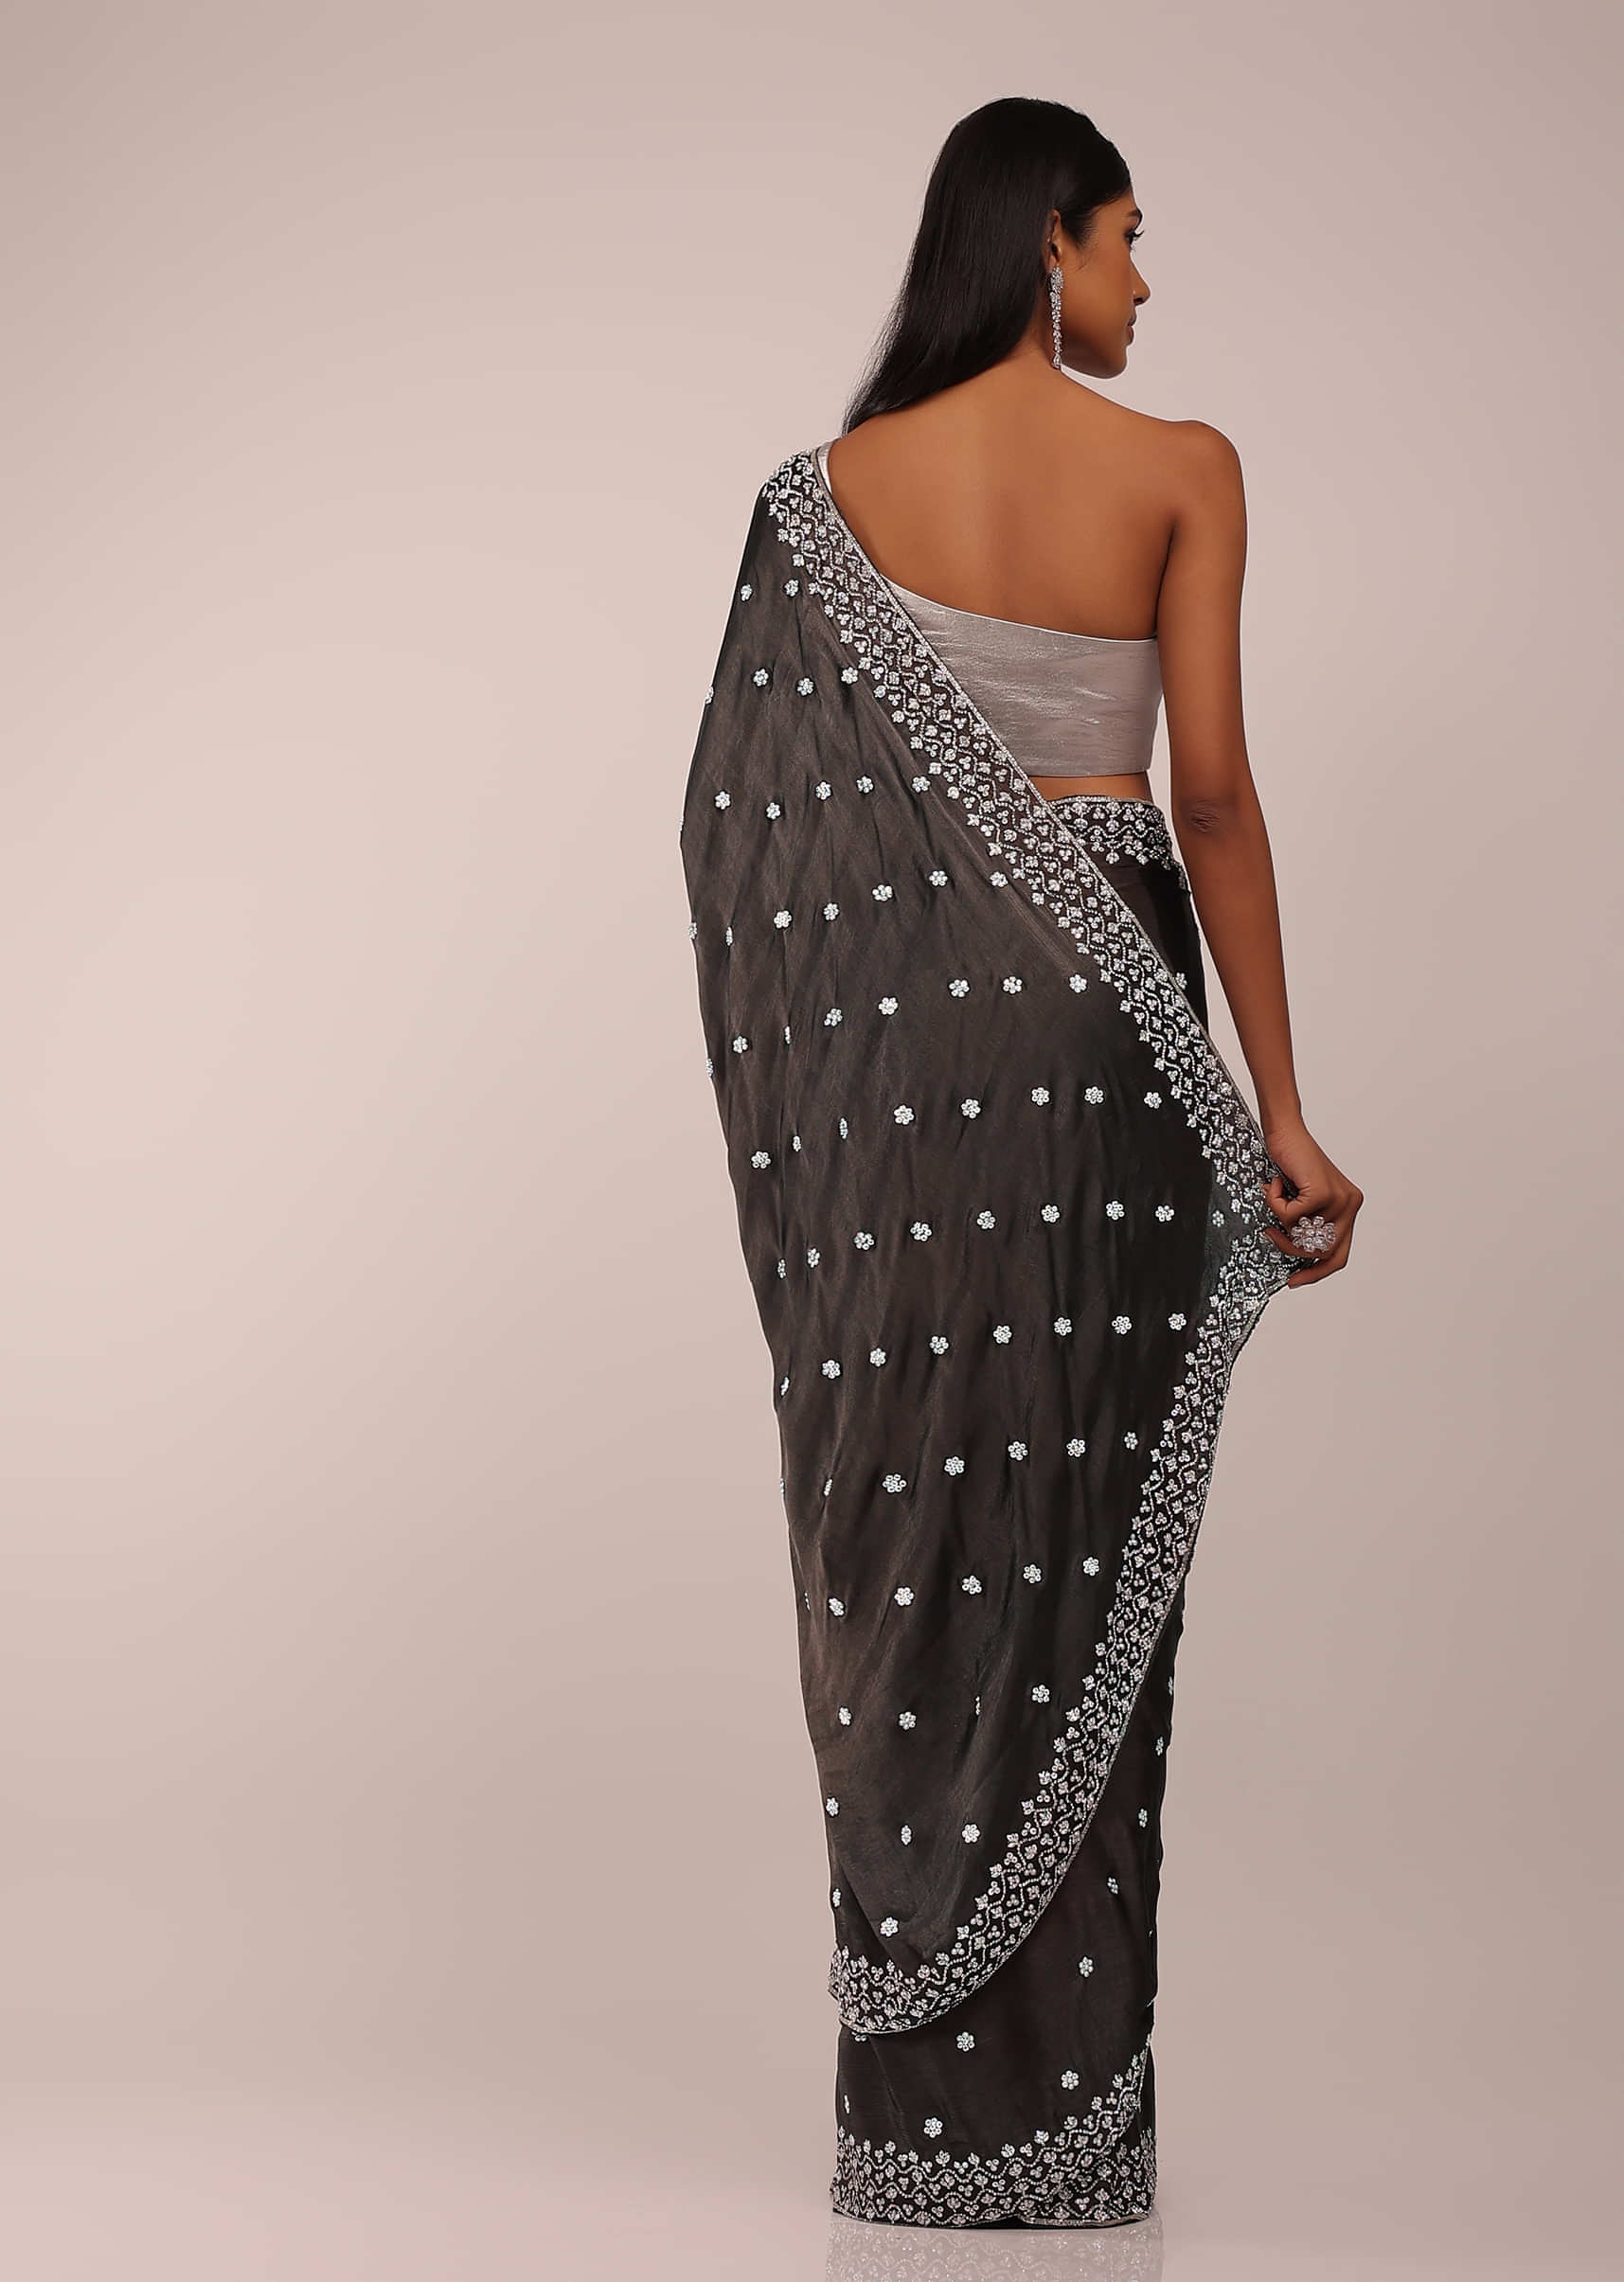 Grey Satin Saree In Silver Petals And Beads Embellishment Buttis With Petal Sequins And Stones On The Border